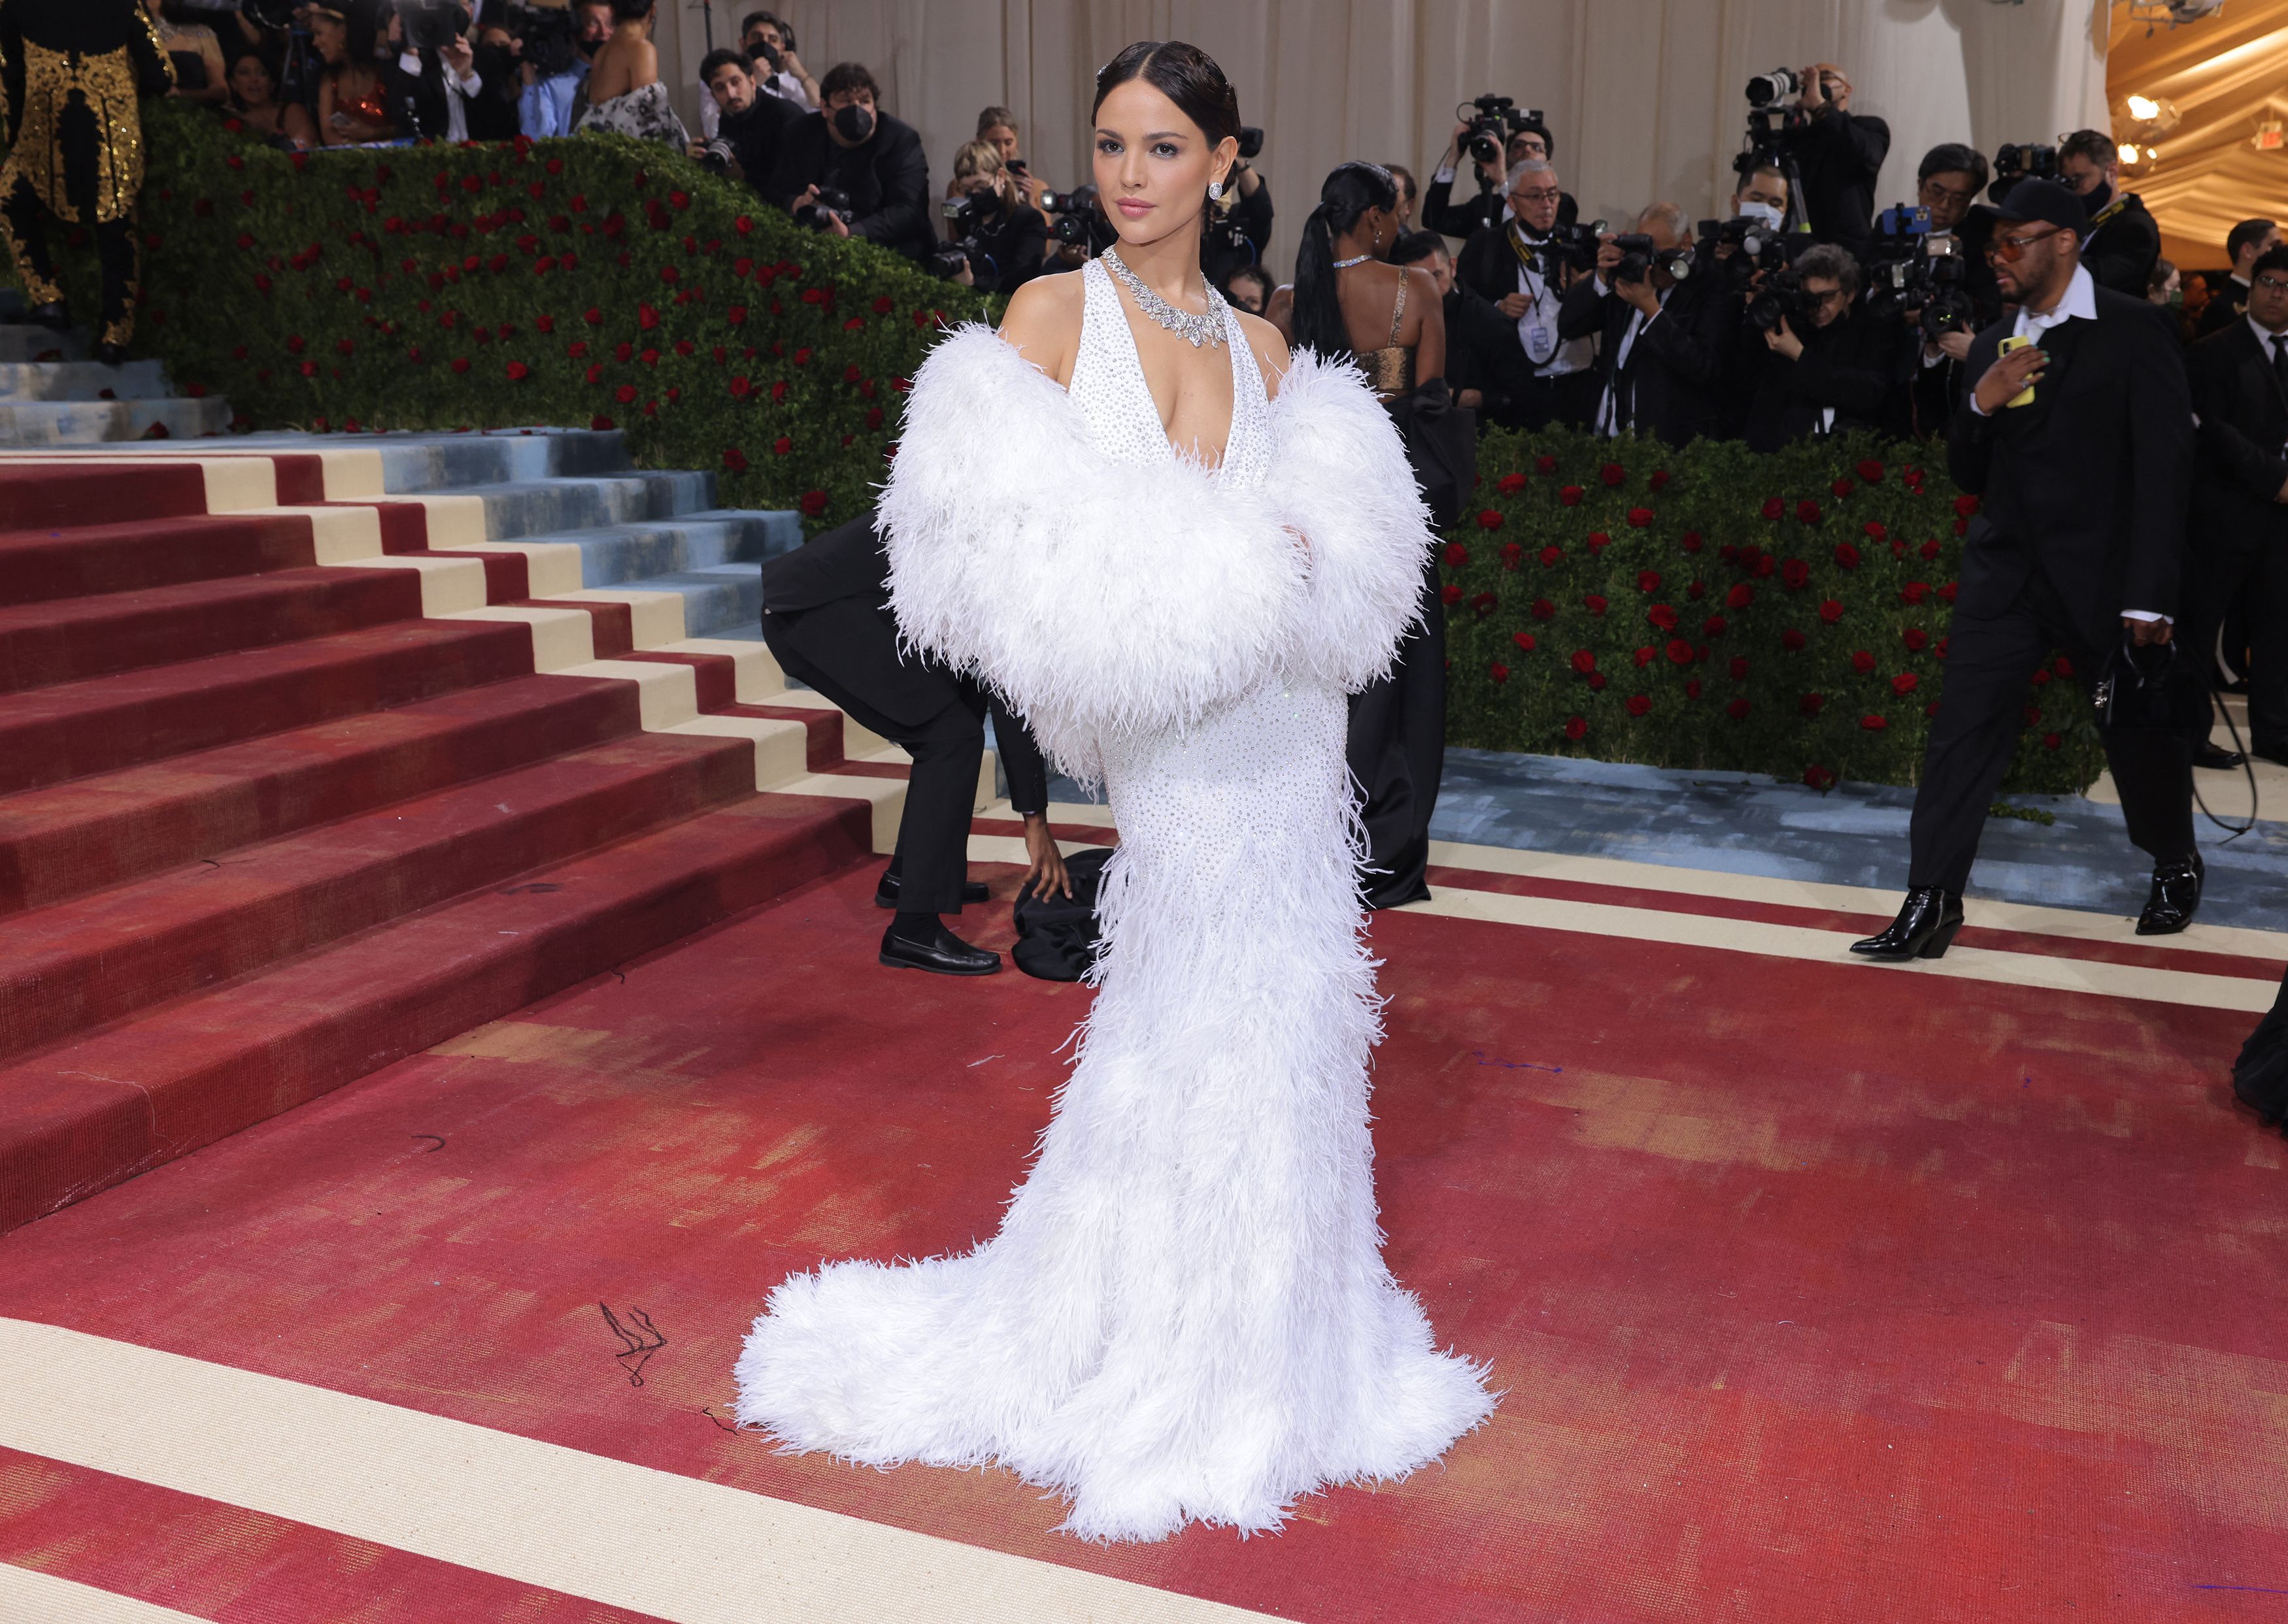 Eiza Gonzalez arrives at the In America: An Anthology of Fashion themed Met Gala at the Metropolitan Museum of Art in New York City, New York, U.S., May 2, 2022. REUTERS/Andrew Kelly